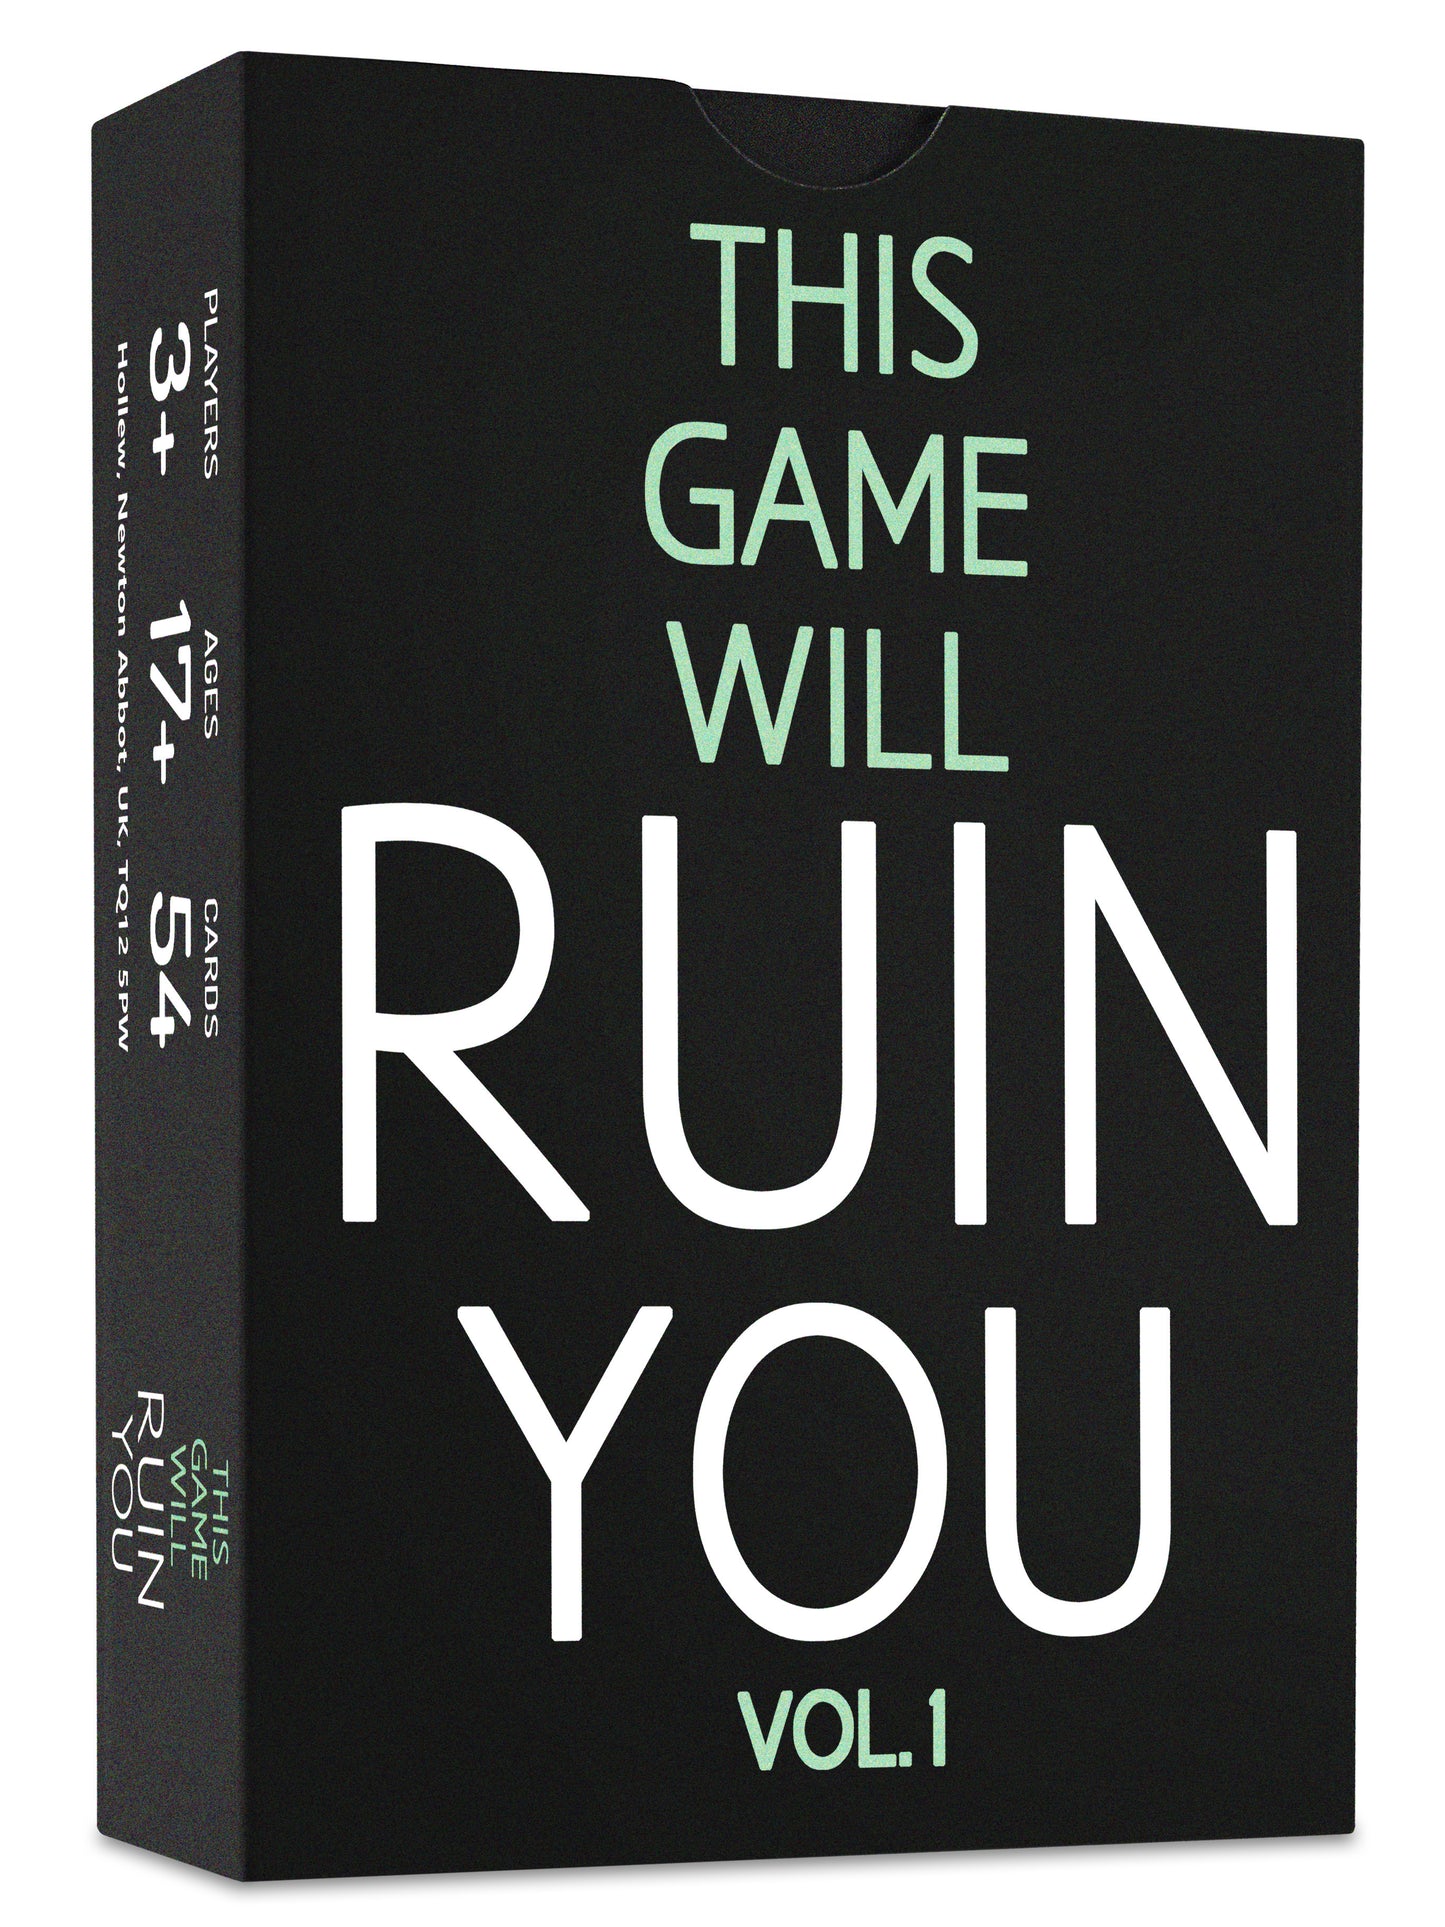 This Game Will Ruin You Vol 1 - Card Games for Adults & Hen Parties - Party Games for Uni Students & Fun Adult Games- Board Games for Groups & Couples or 18th Birthday Gift Visit the Hollew Store